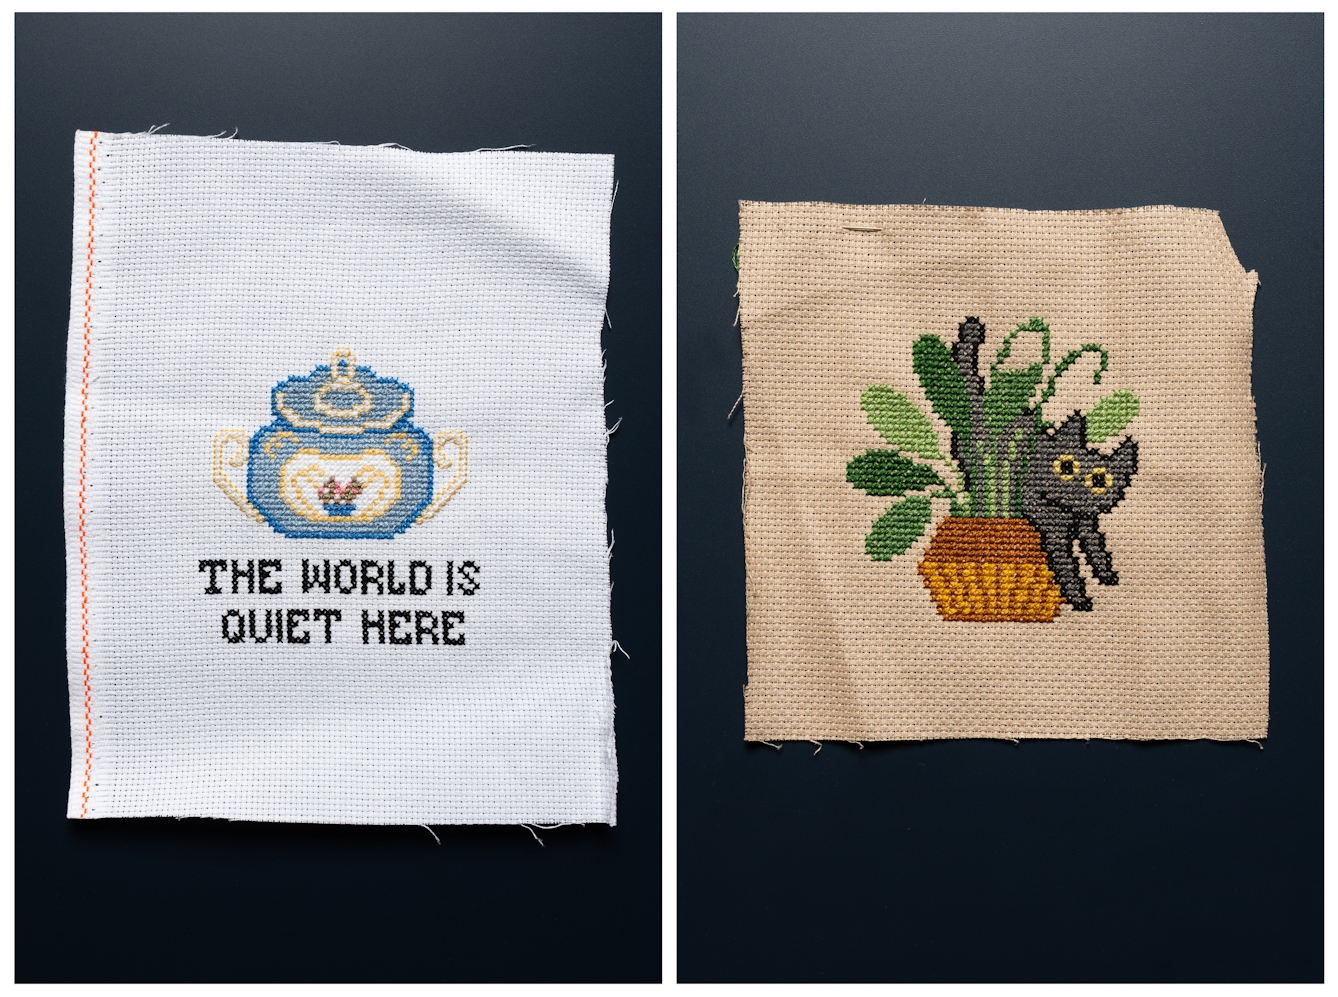 Two photographs placed next to each other showing completed cross-stitch patters. The left is of a small ceramic pot and the words 'the world is quiet here'. The one on the right depicts a small cat partially hidden by a pot plant.